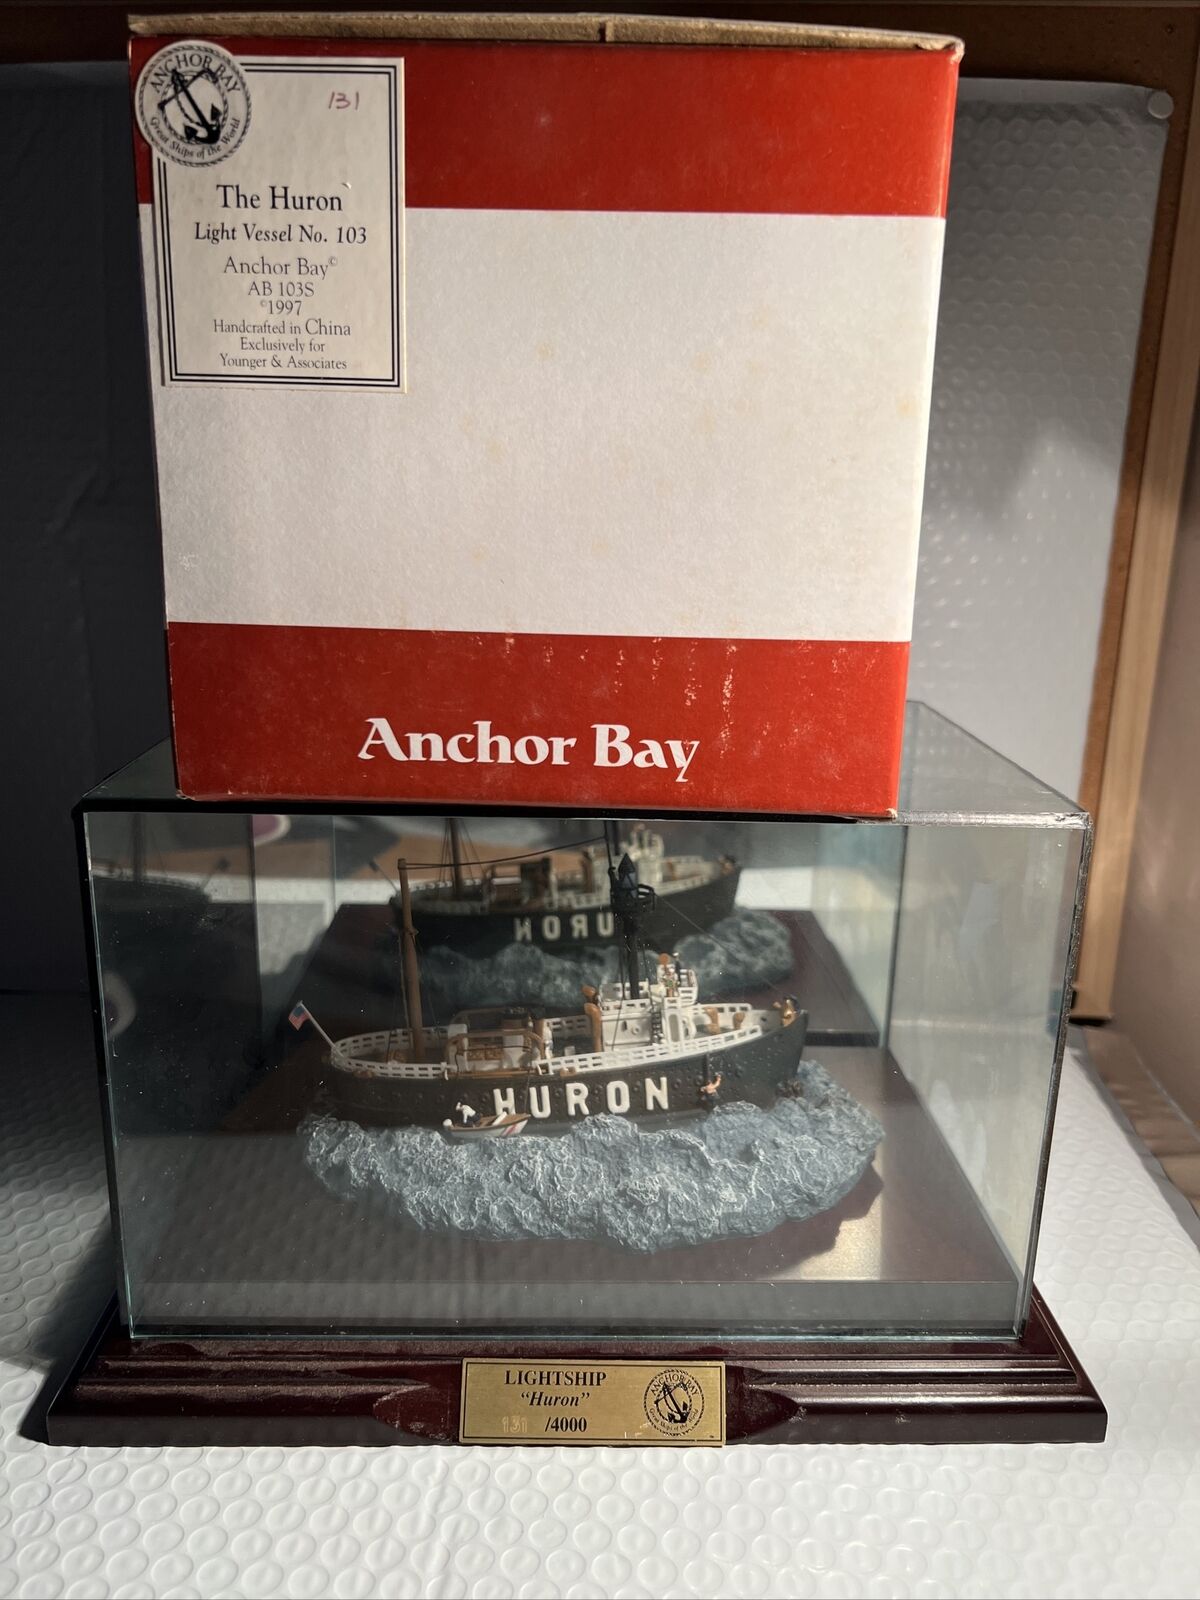 HARBOUR LIGHTS ANCHOR BAY GREAT SHIPS - THE HURON - LIGHT VESSEL NO 103 - SIGNED